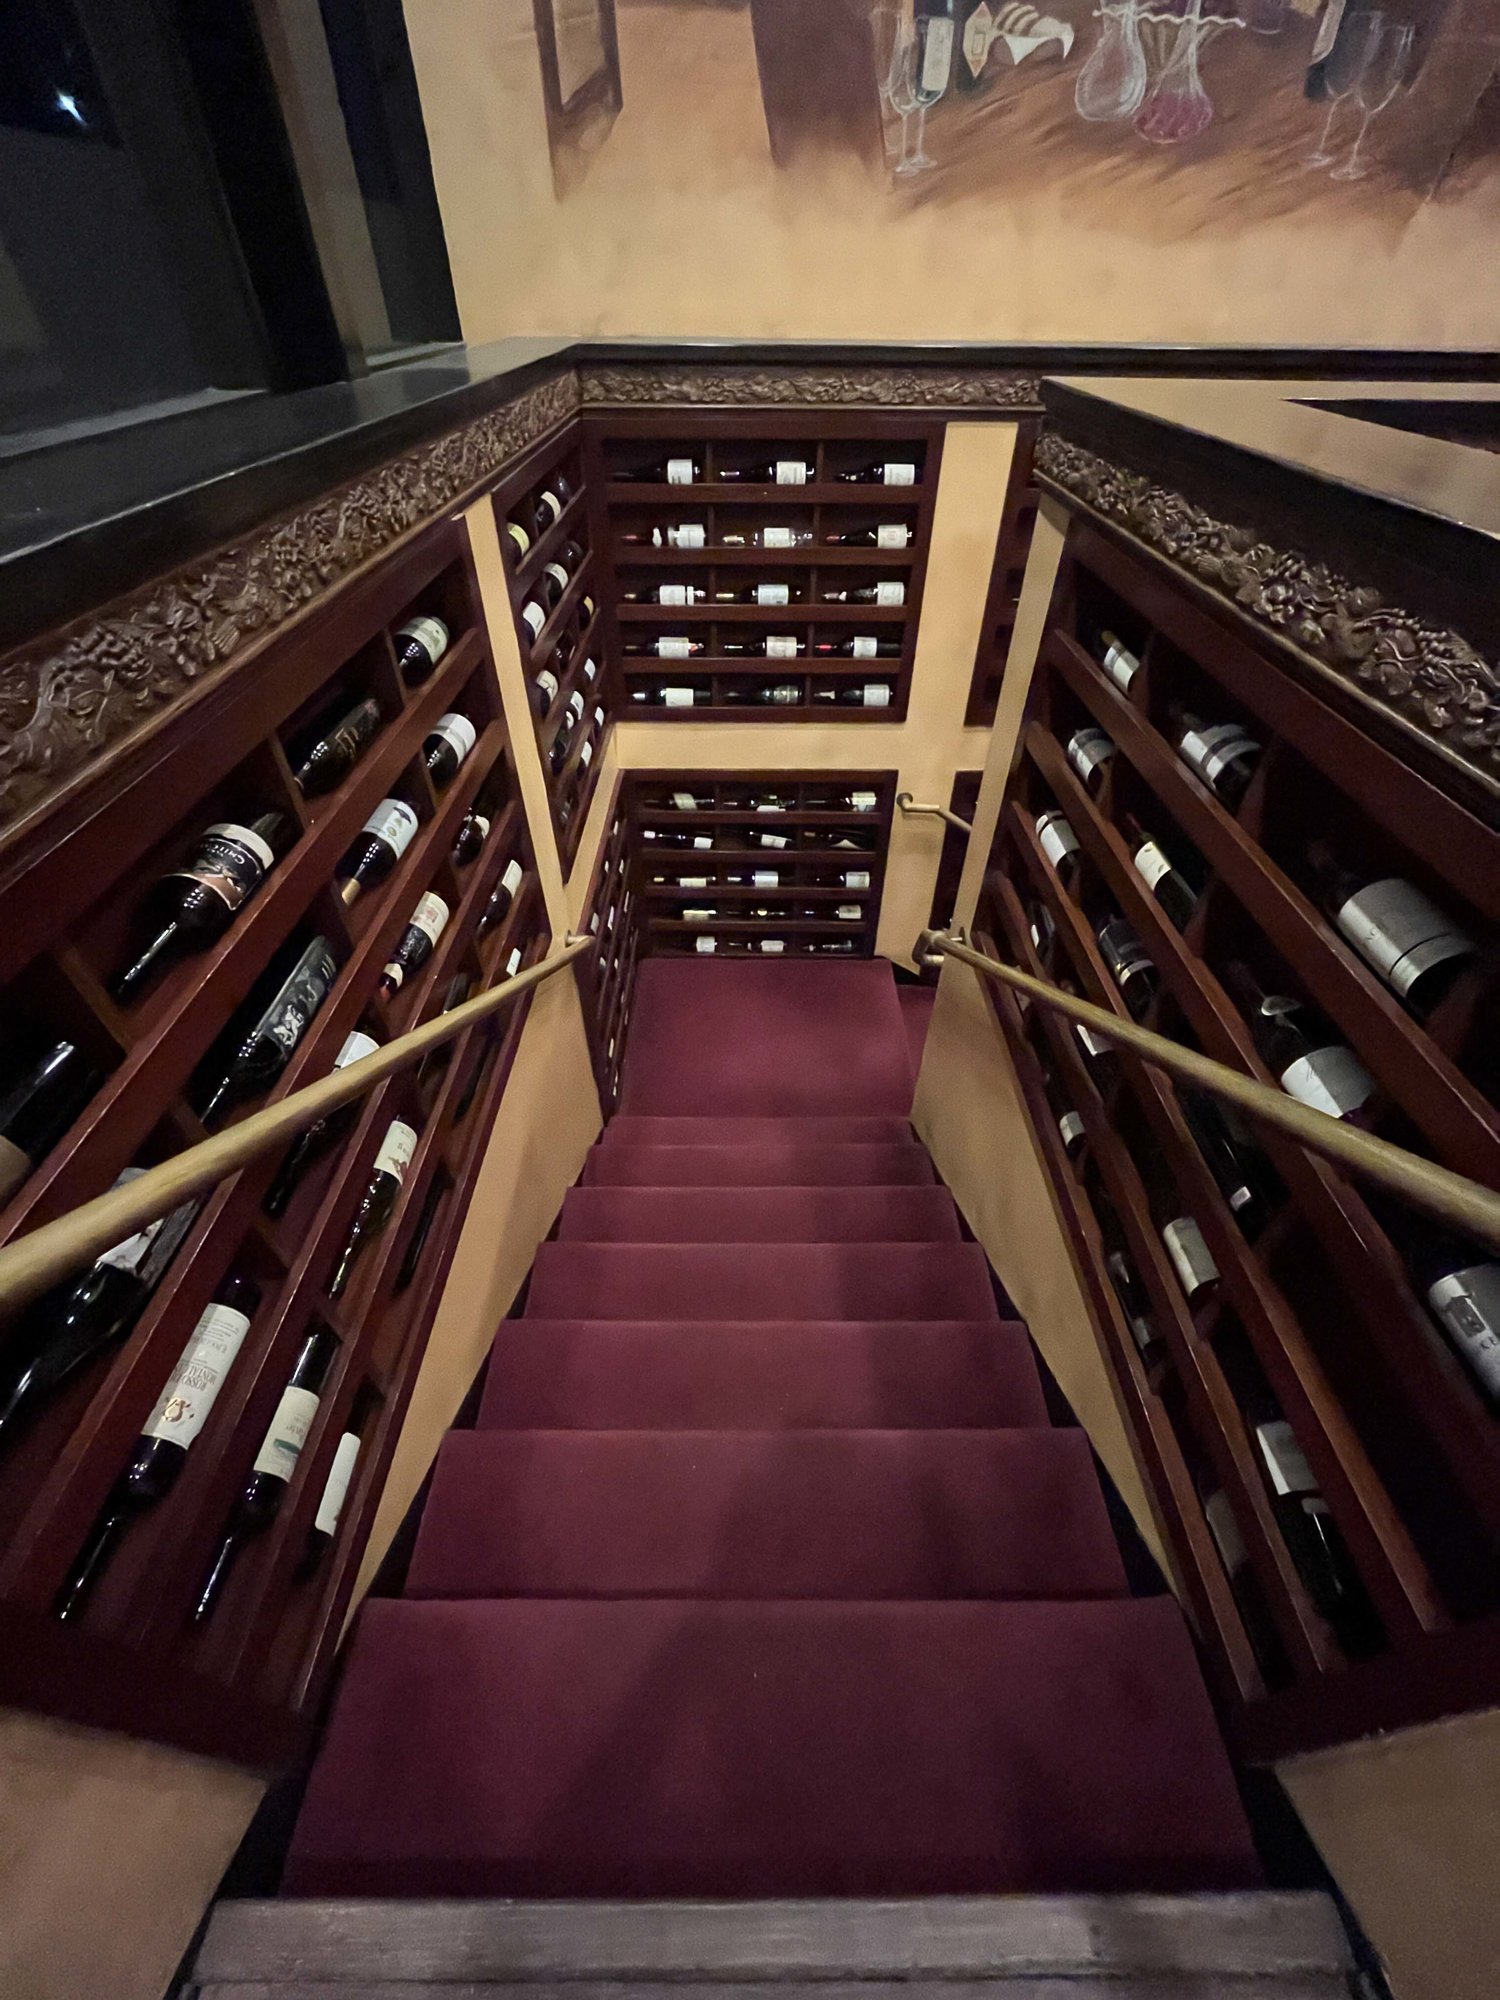 stairs down to the basement with shelves of wine bottles